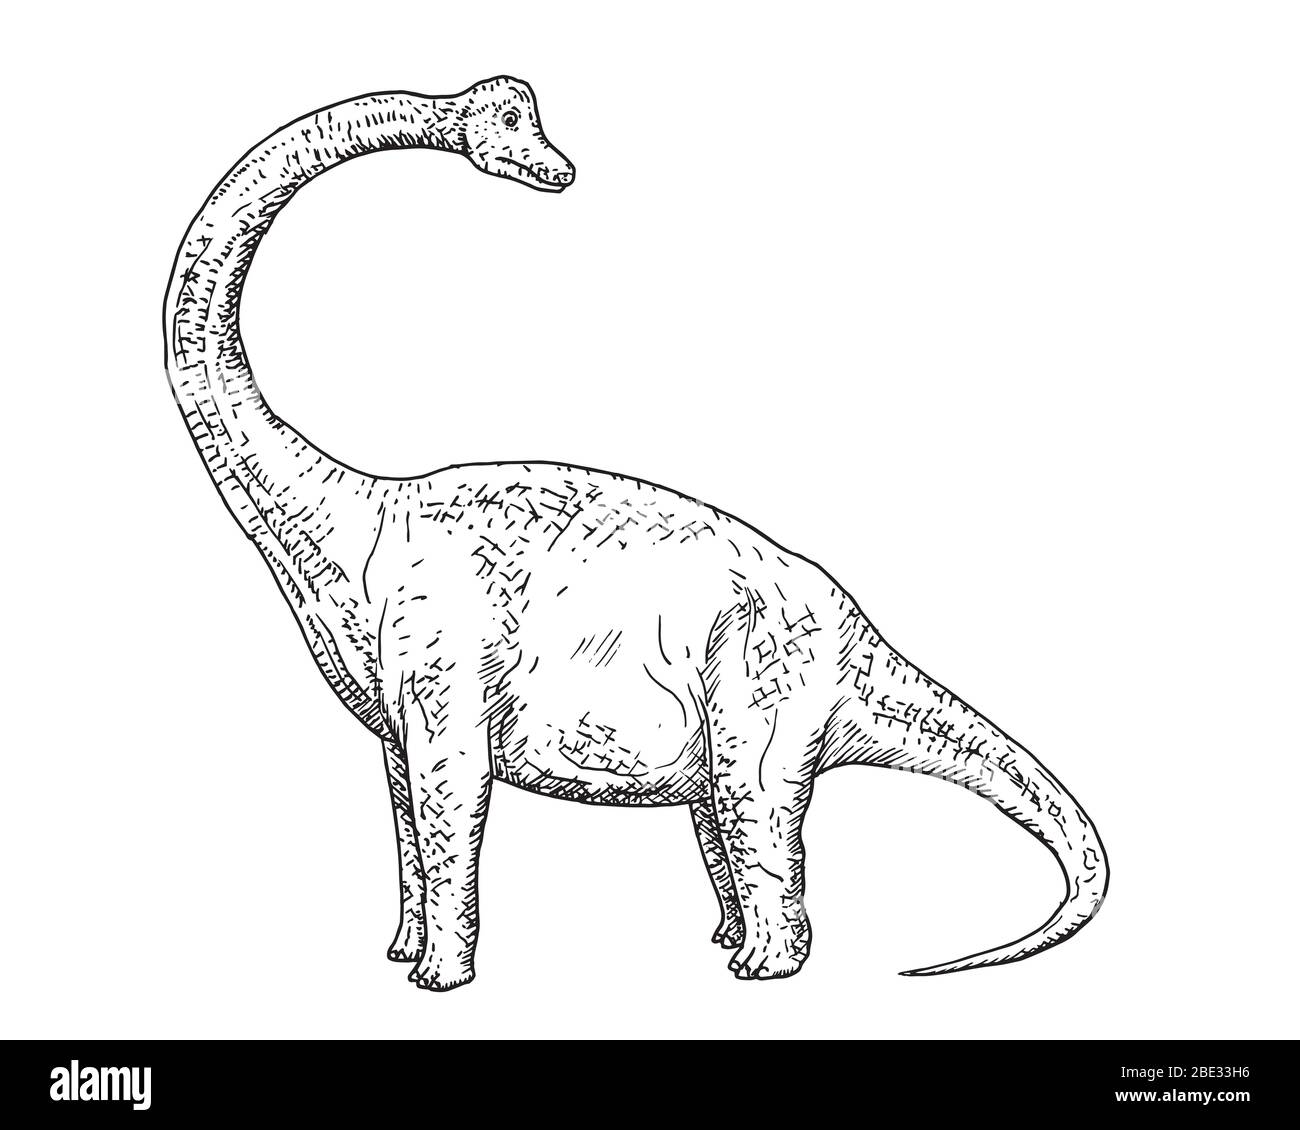 How to Draw a CUTE DIPLODOCUS DINOSAUR ( Easy Step by Step Drawing) #draw  #dinosaur #htdraw - YouTube